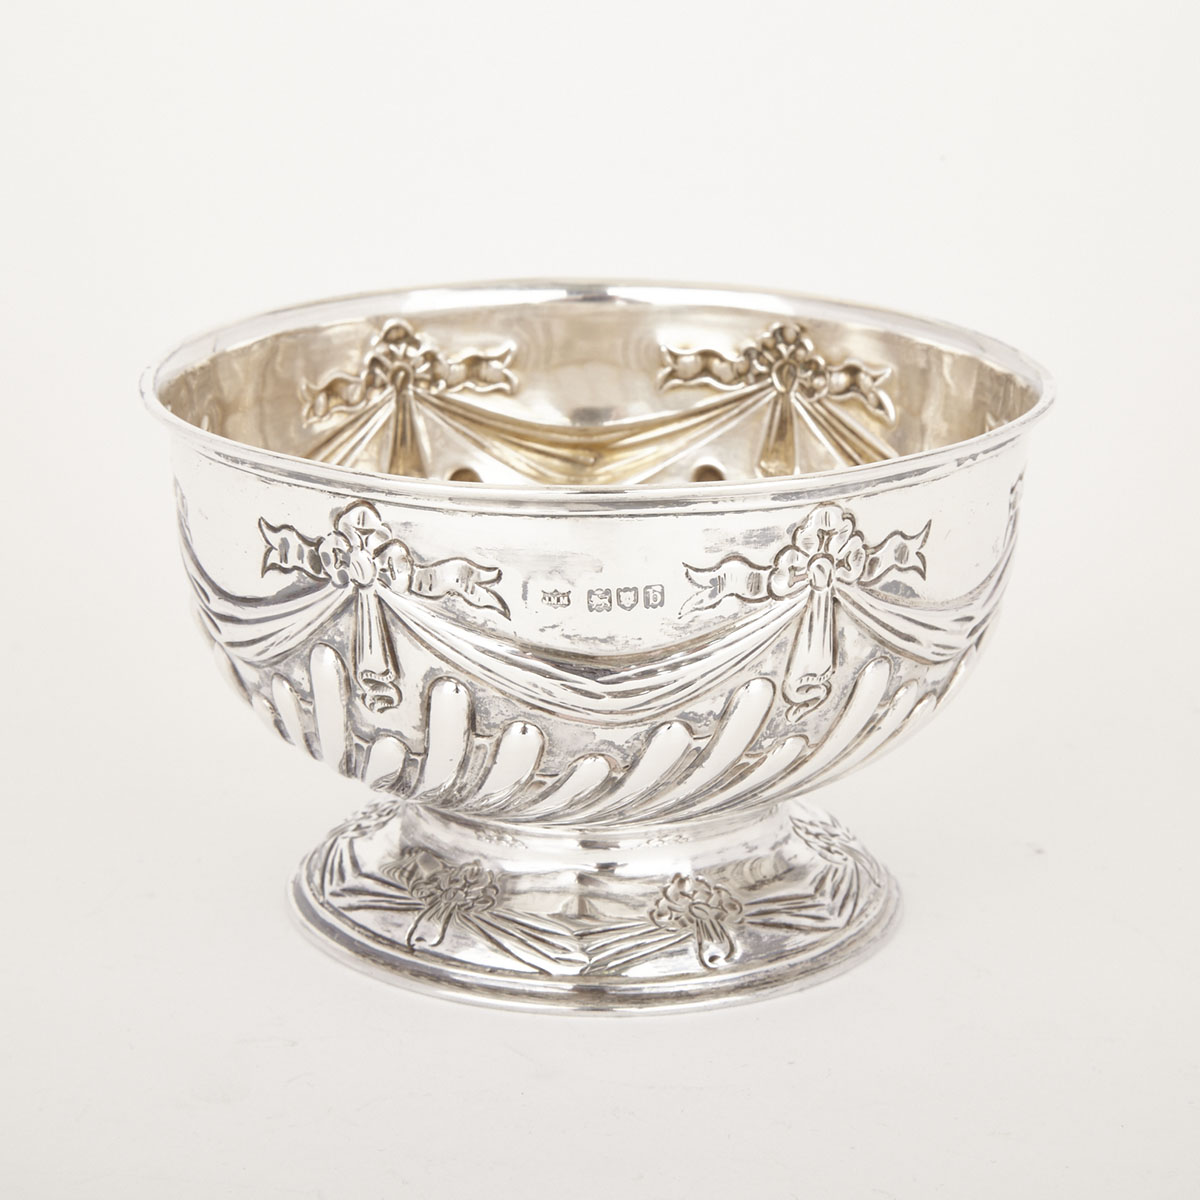 Late Victorian Silver Footed Bowl, Mappin & Webb, London, 1897